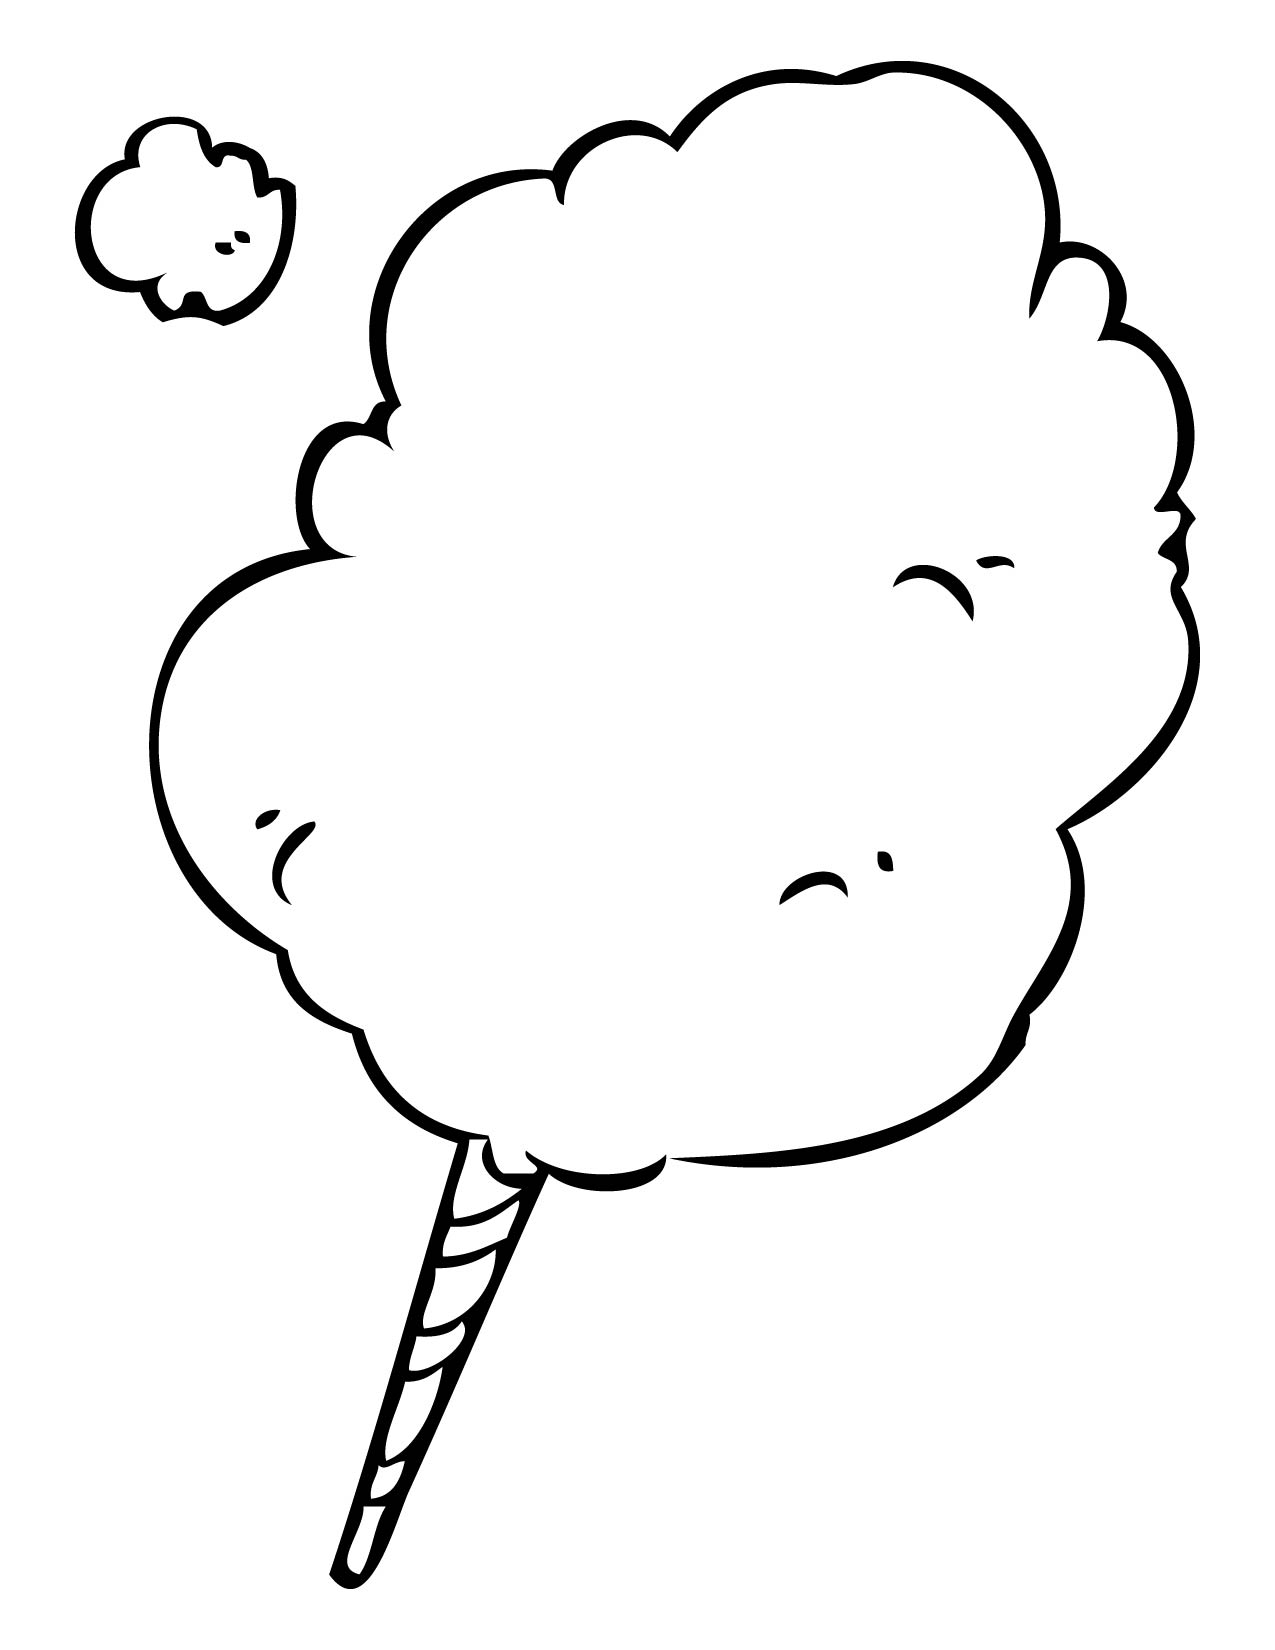 Candy  black and white cotton candy clipart black and white free